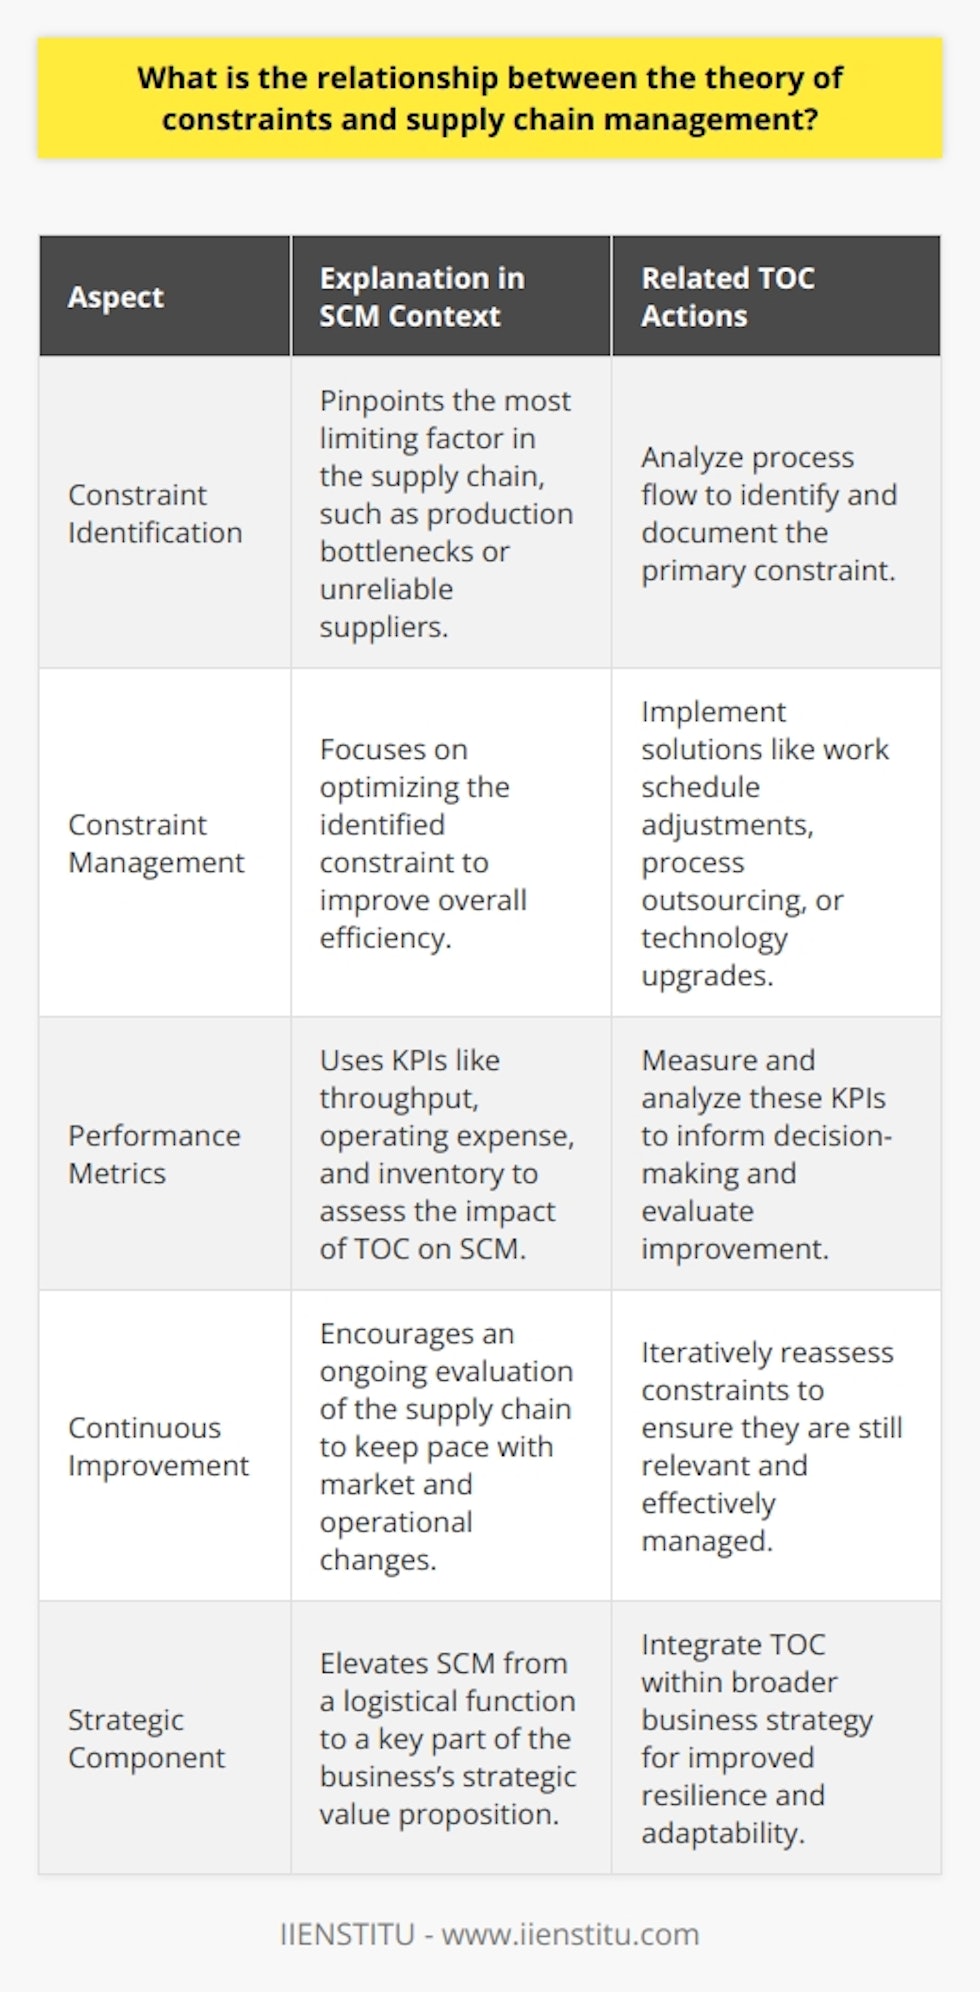 The Theory of Constraints (TOC) and Supply Chain Management (SCM) are linked in a symbiotic relationship that aims to enhance the efficiency of a business by systematically addressing limitations and improving flow within operations.The Core of TOC in SCMAt the heart of the TOC is a focus on identifying the single most limiting factor (constraint) that stands in the way of achieving higher performance in any given process or system. In the context of SCM, this could be anything from a bottleneck in production, inefficient logistical arrangements, to unreliable suppliers. The goal of TOC is to manage and optimize these constraints to ensure they do not hinder the supply chain's overall efficiency.Strategies and SolutionsImplementing TOC within SCM usually follows a strict process: identify the constraint, exploit the constraint (optimize), subordinate everything else to the above decision, elevate the constraint (if necessary and possible), and then go back to the first step to identify new constraints as the previous ones are addressed or no longer present. Actions might vary from reorganizing work schedules, outsourcing certain processes, to investing in new technologies or capacity expansion.Performance MetricsIn SCM, TOC's impact is often measured with specific KPIs that assess throughput, operating expense, and inventory. These metrics help in determining not only the performance of a single entity within the supply chain but also the end-to-end efficiency of the complete system. Understanding these measures allows supply chain managers to make informed decisions that align with the systematic improvement of constraints.Continuous Improvement PhilosophyThe dynamic nature of TOC makes it a tool ideal for underpinning a continuous improvement paradigm within SCM. Since market demands and operational capabilities will inevitably change, TOC's iterative approach ensures that new or shifting constraints do not go unaddressed for long. This cultivates a proactive mindset among managers and teams, which is essential for staying ahead of competition and market trends.TOC in SCM is about much more than a temporary fix; it involves a profound understanding of the cause and effect within operational systems. By leveraging TOC principles, companies can enhance their supply chain resilience, adaptability, and ultimately, their service levels to customers.In practice, the relationship between the Theory of Constraints and Supply Chain Management is profound and transformative. TOC provides a lens through which to view SCM processes, directing attention to the weakest links, and creating a platform for methodical and sustained operational improvements. It is through this relationship that SCM can evolve from a logistical function to a key strategic component of a business's value proposition.